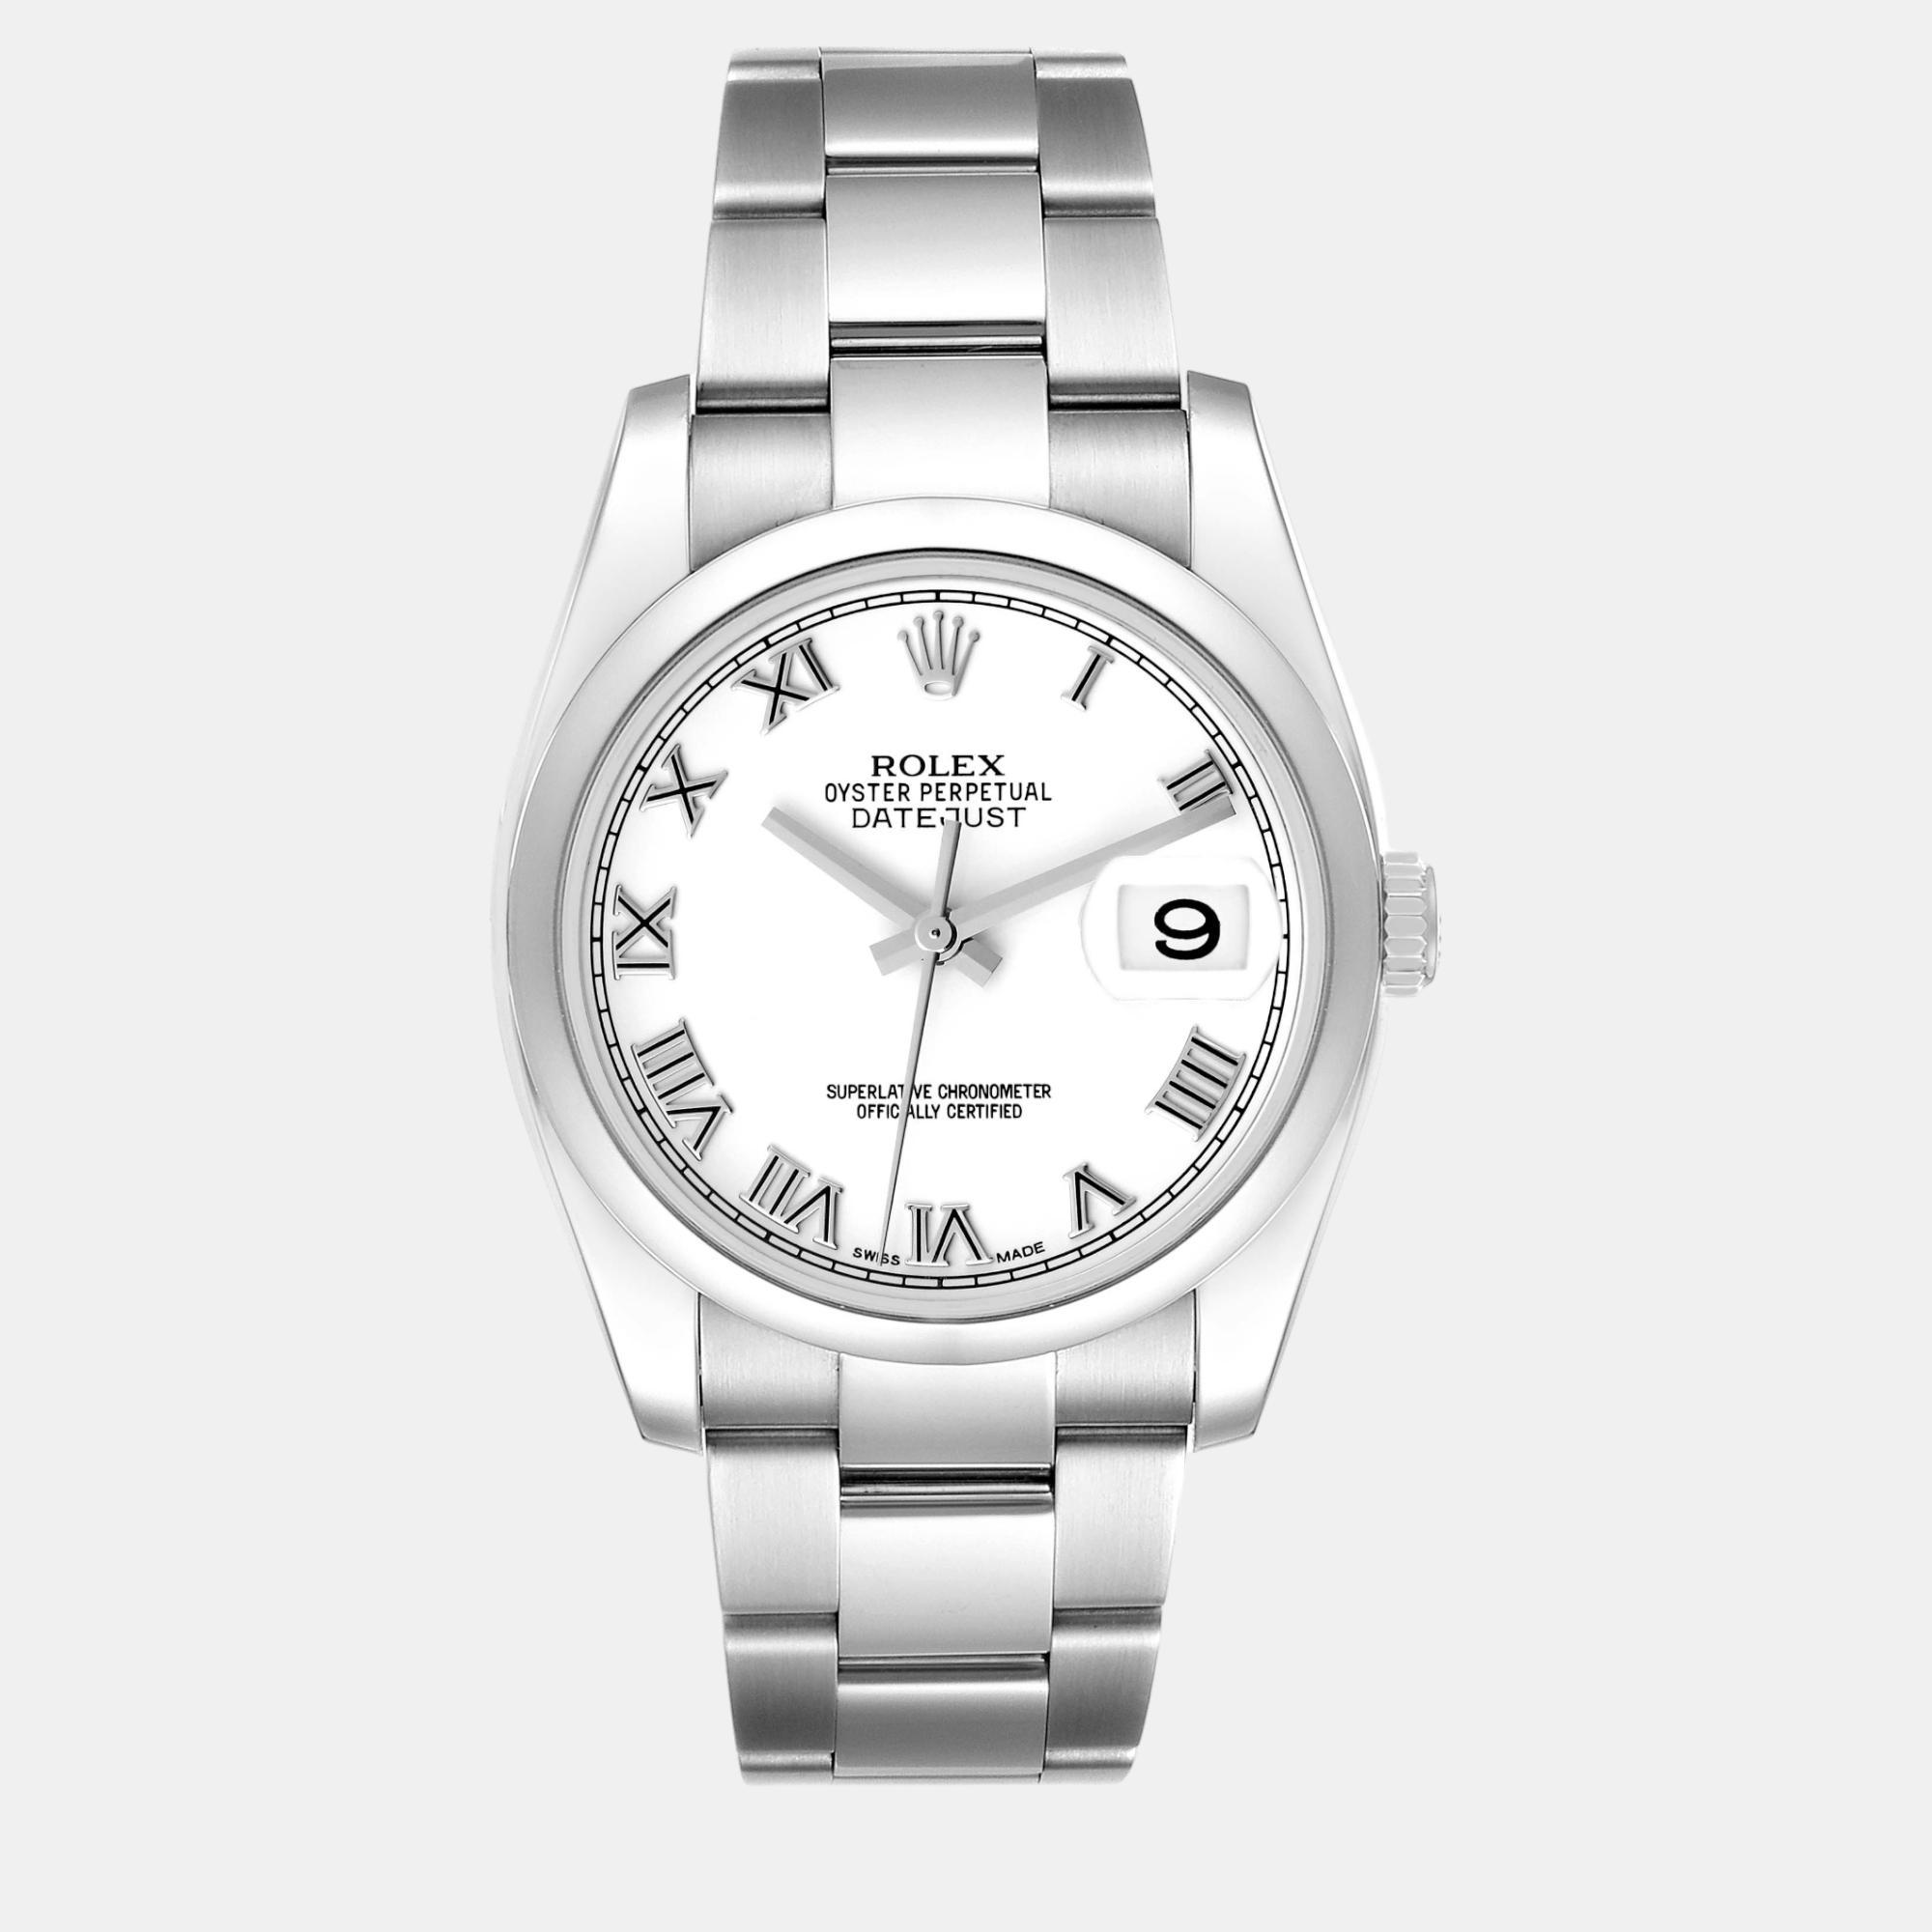 Elevate your watch collection with an authentic Rolex masterpiece. A symbol of status and precision it boasts exquisite craftsmanship a timeless design and a legacy of horological excellence.